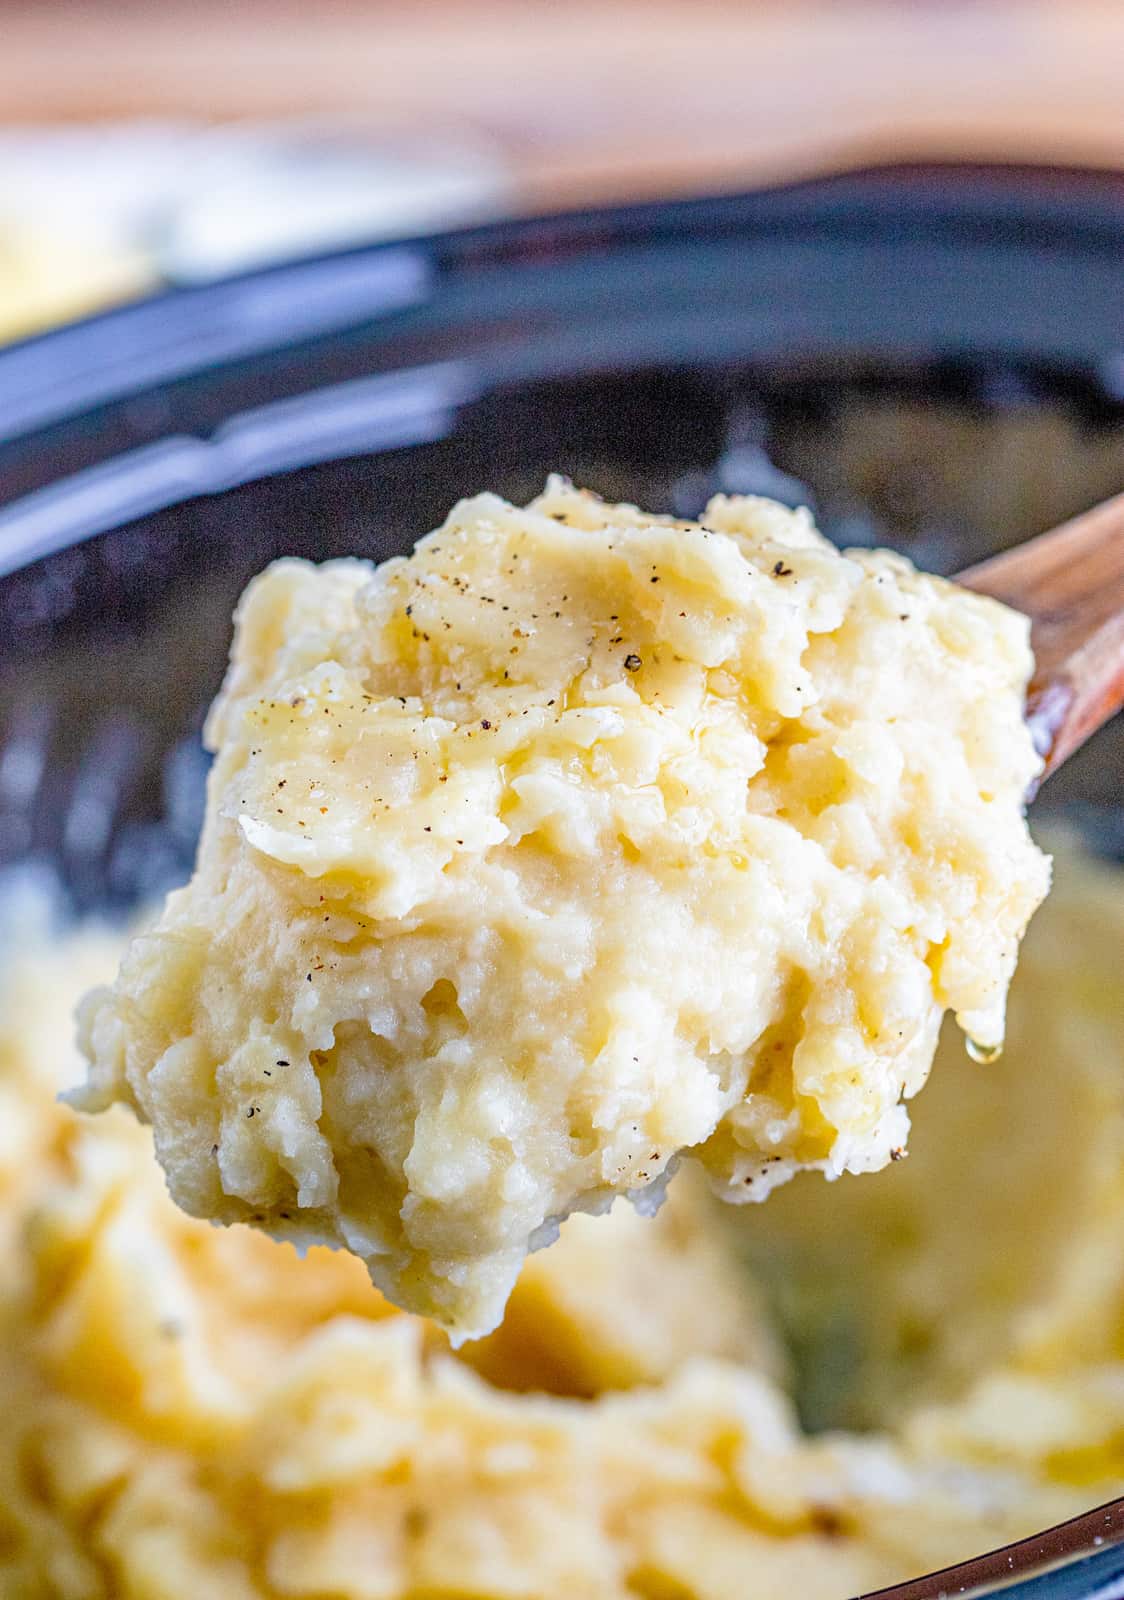 Wooden spoon lifting up some of the Crockpot Mashed Potatoes out of crockpot.